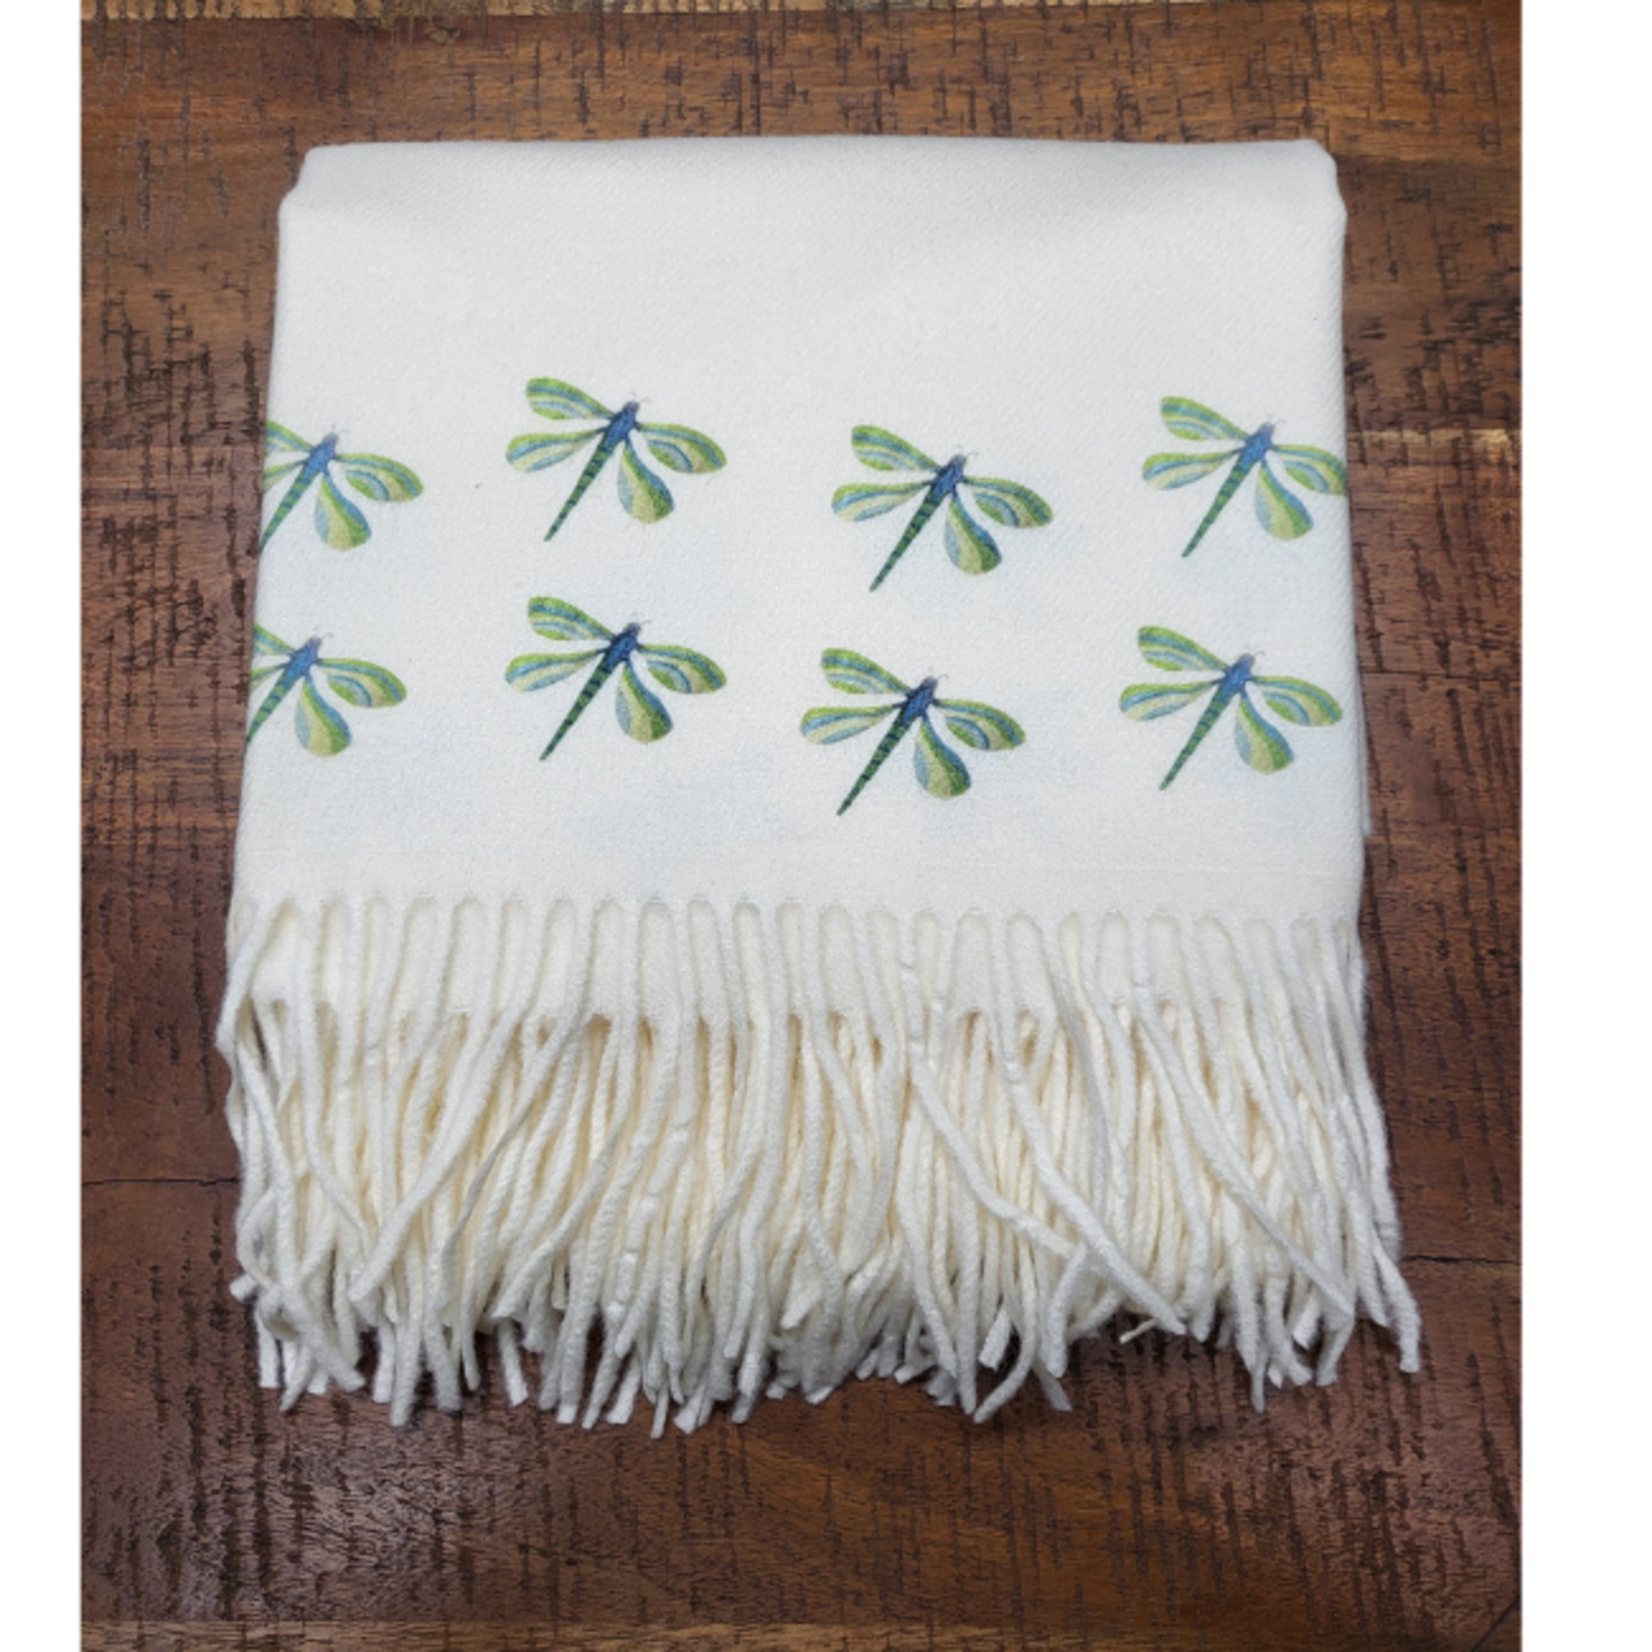 Art on Scarves Cashmere Dragonfly Scarf: Cream